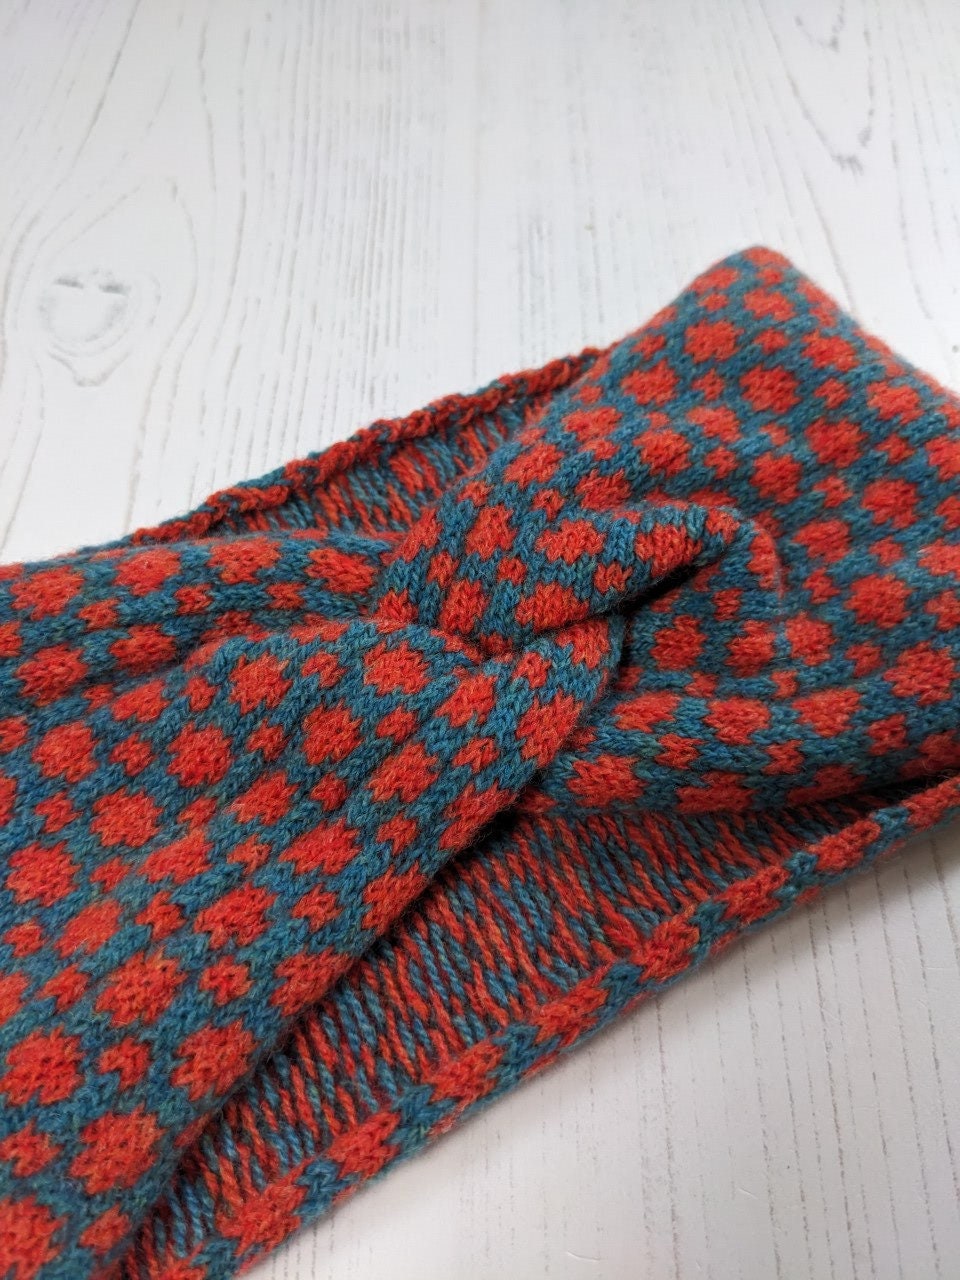 Merino wool ear warmer knitted headband dots and spots design in orange and blue